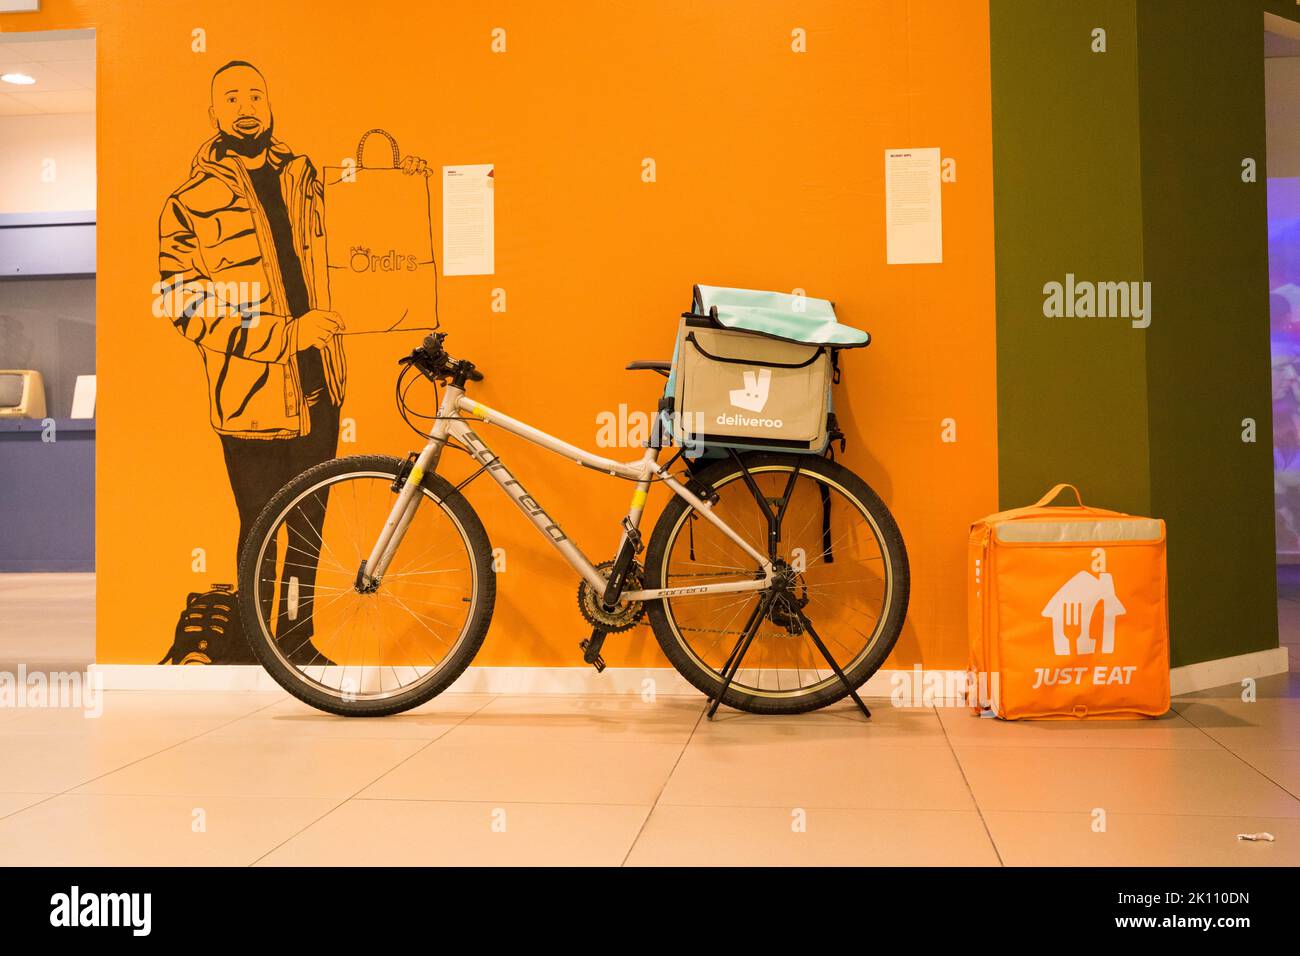 Deliveroo back bag fixed to a delivery bicycle at migration museum in Lewisham Stock Photo